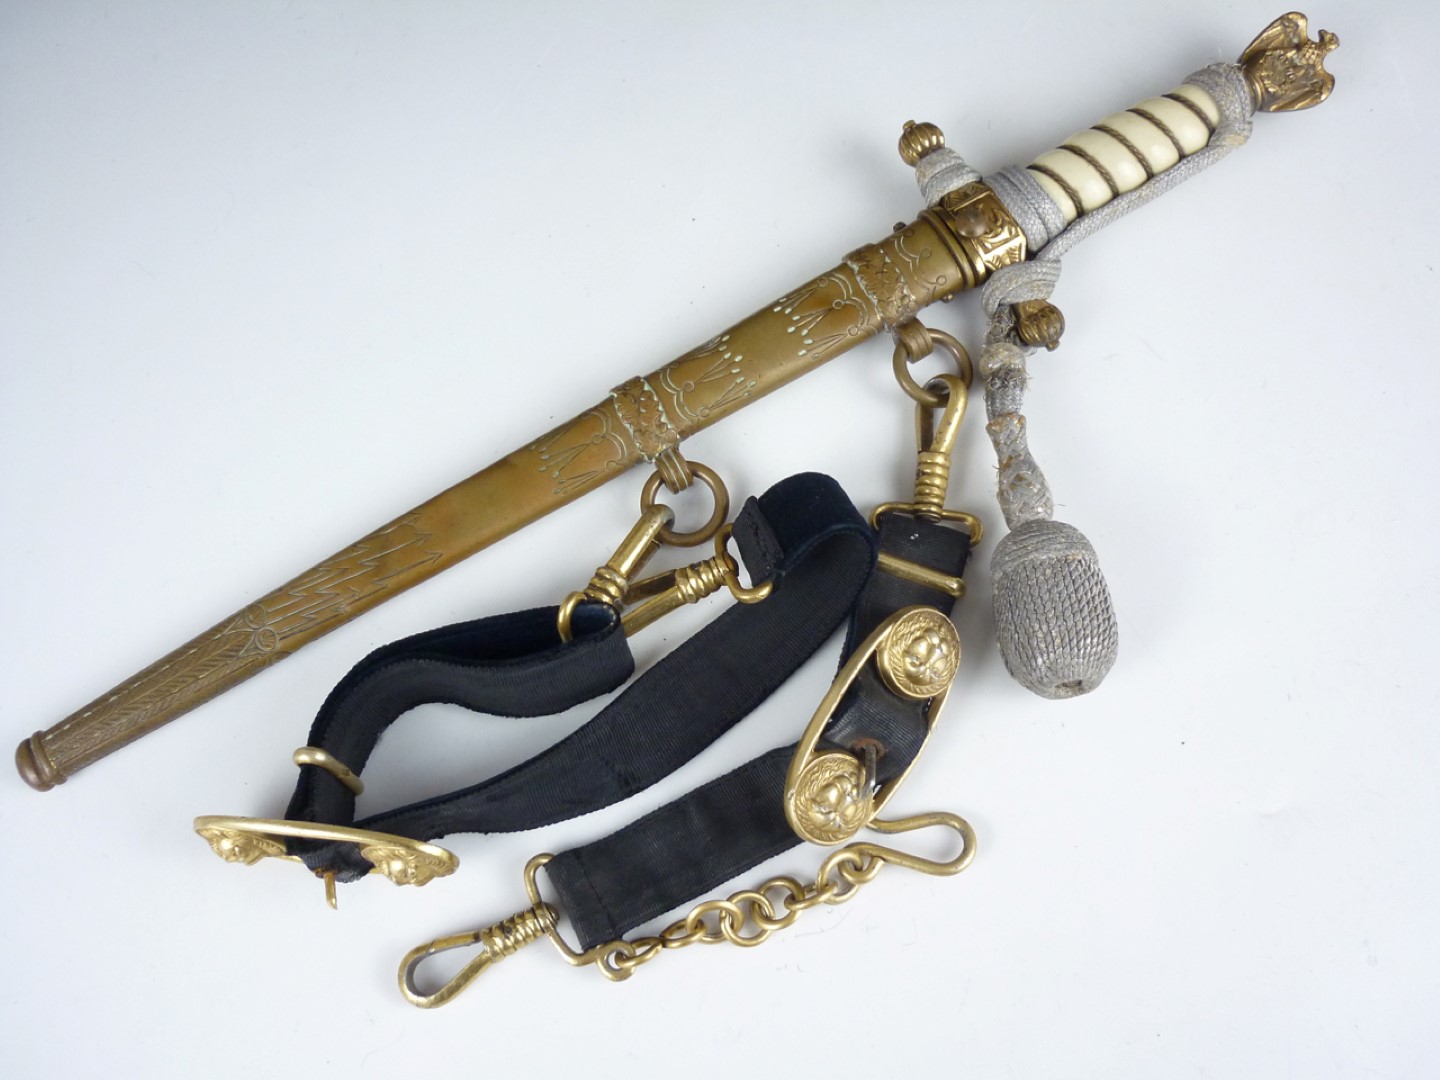 A Second World War German Kriegsmarine officer's dagger by Eikhorn, with portepee and hanging